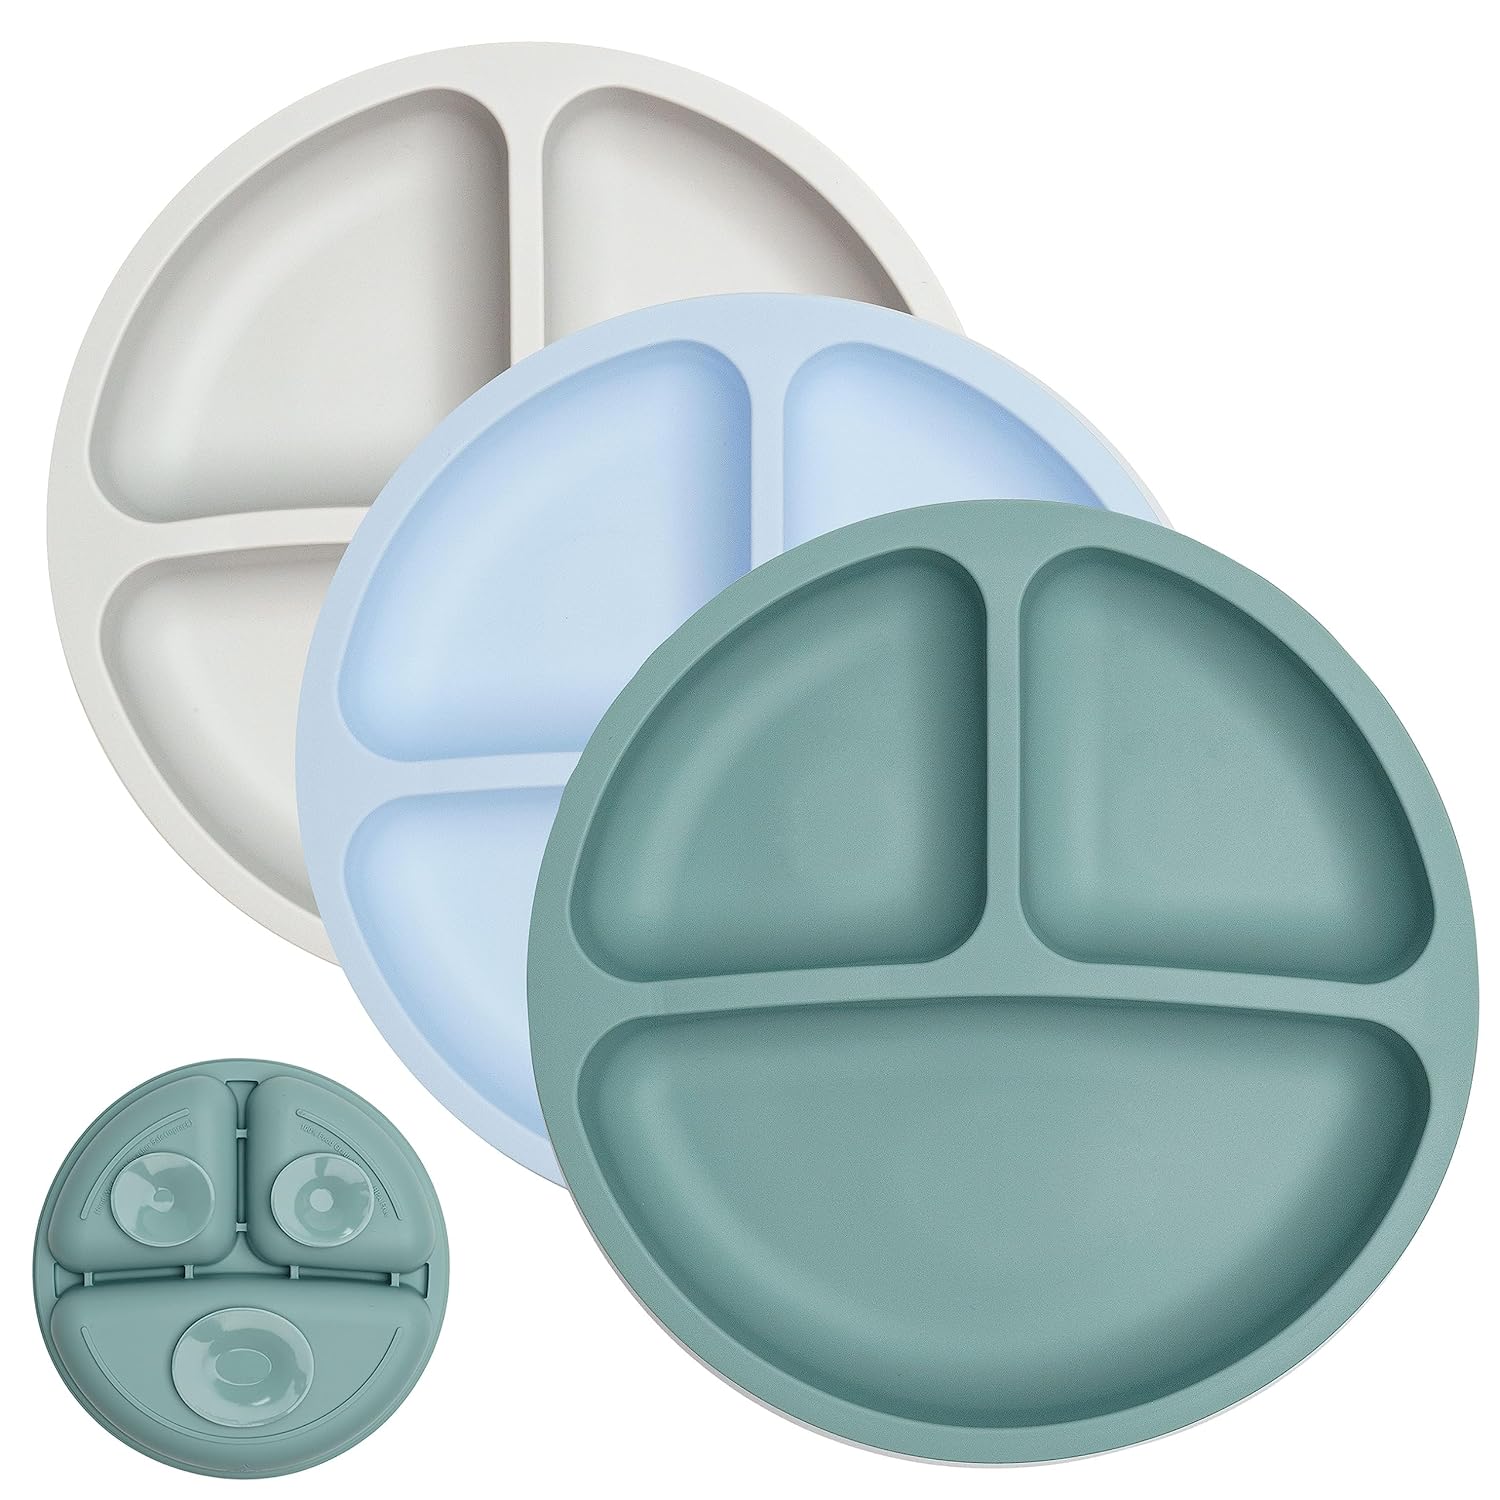 Set of 3 Suction Divided Baby Plates (Blue/Green/Grey)